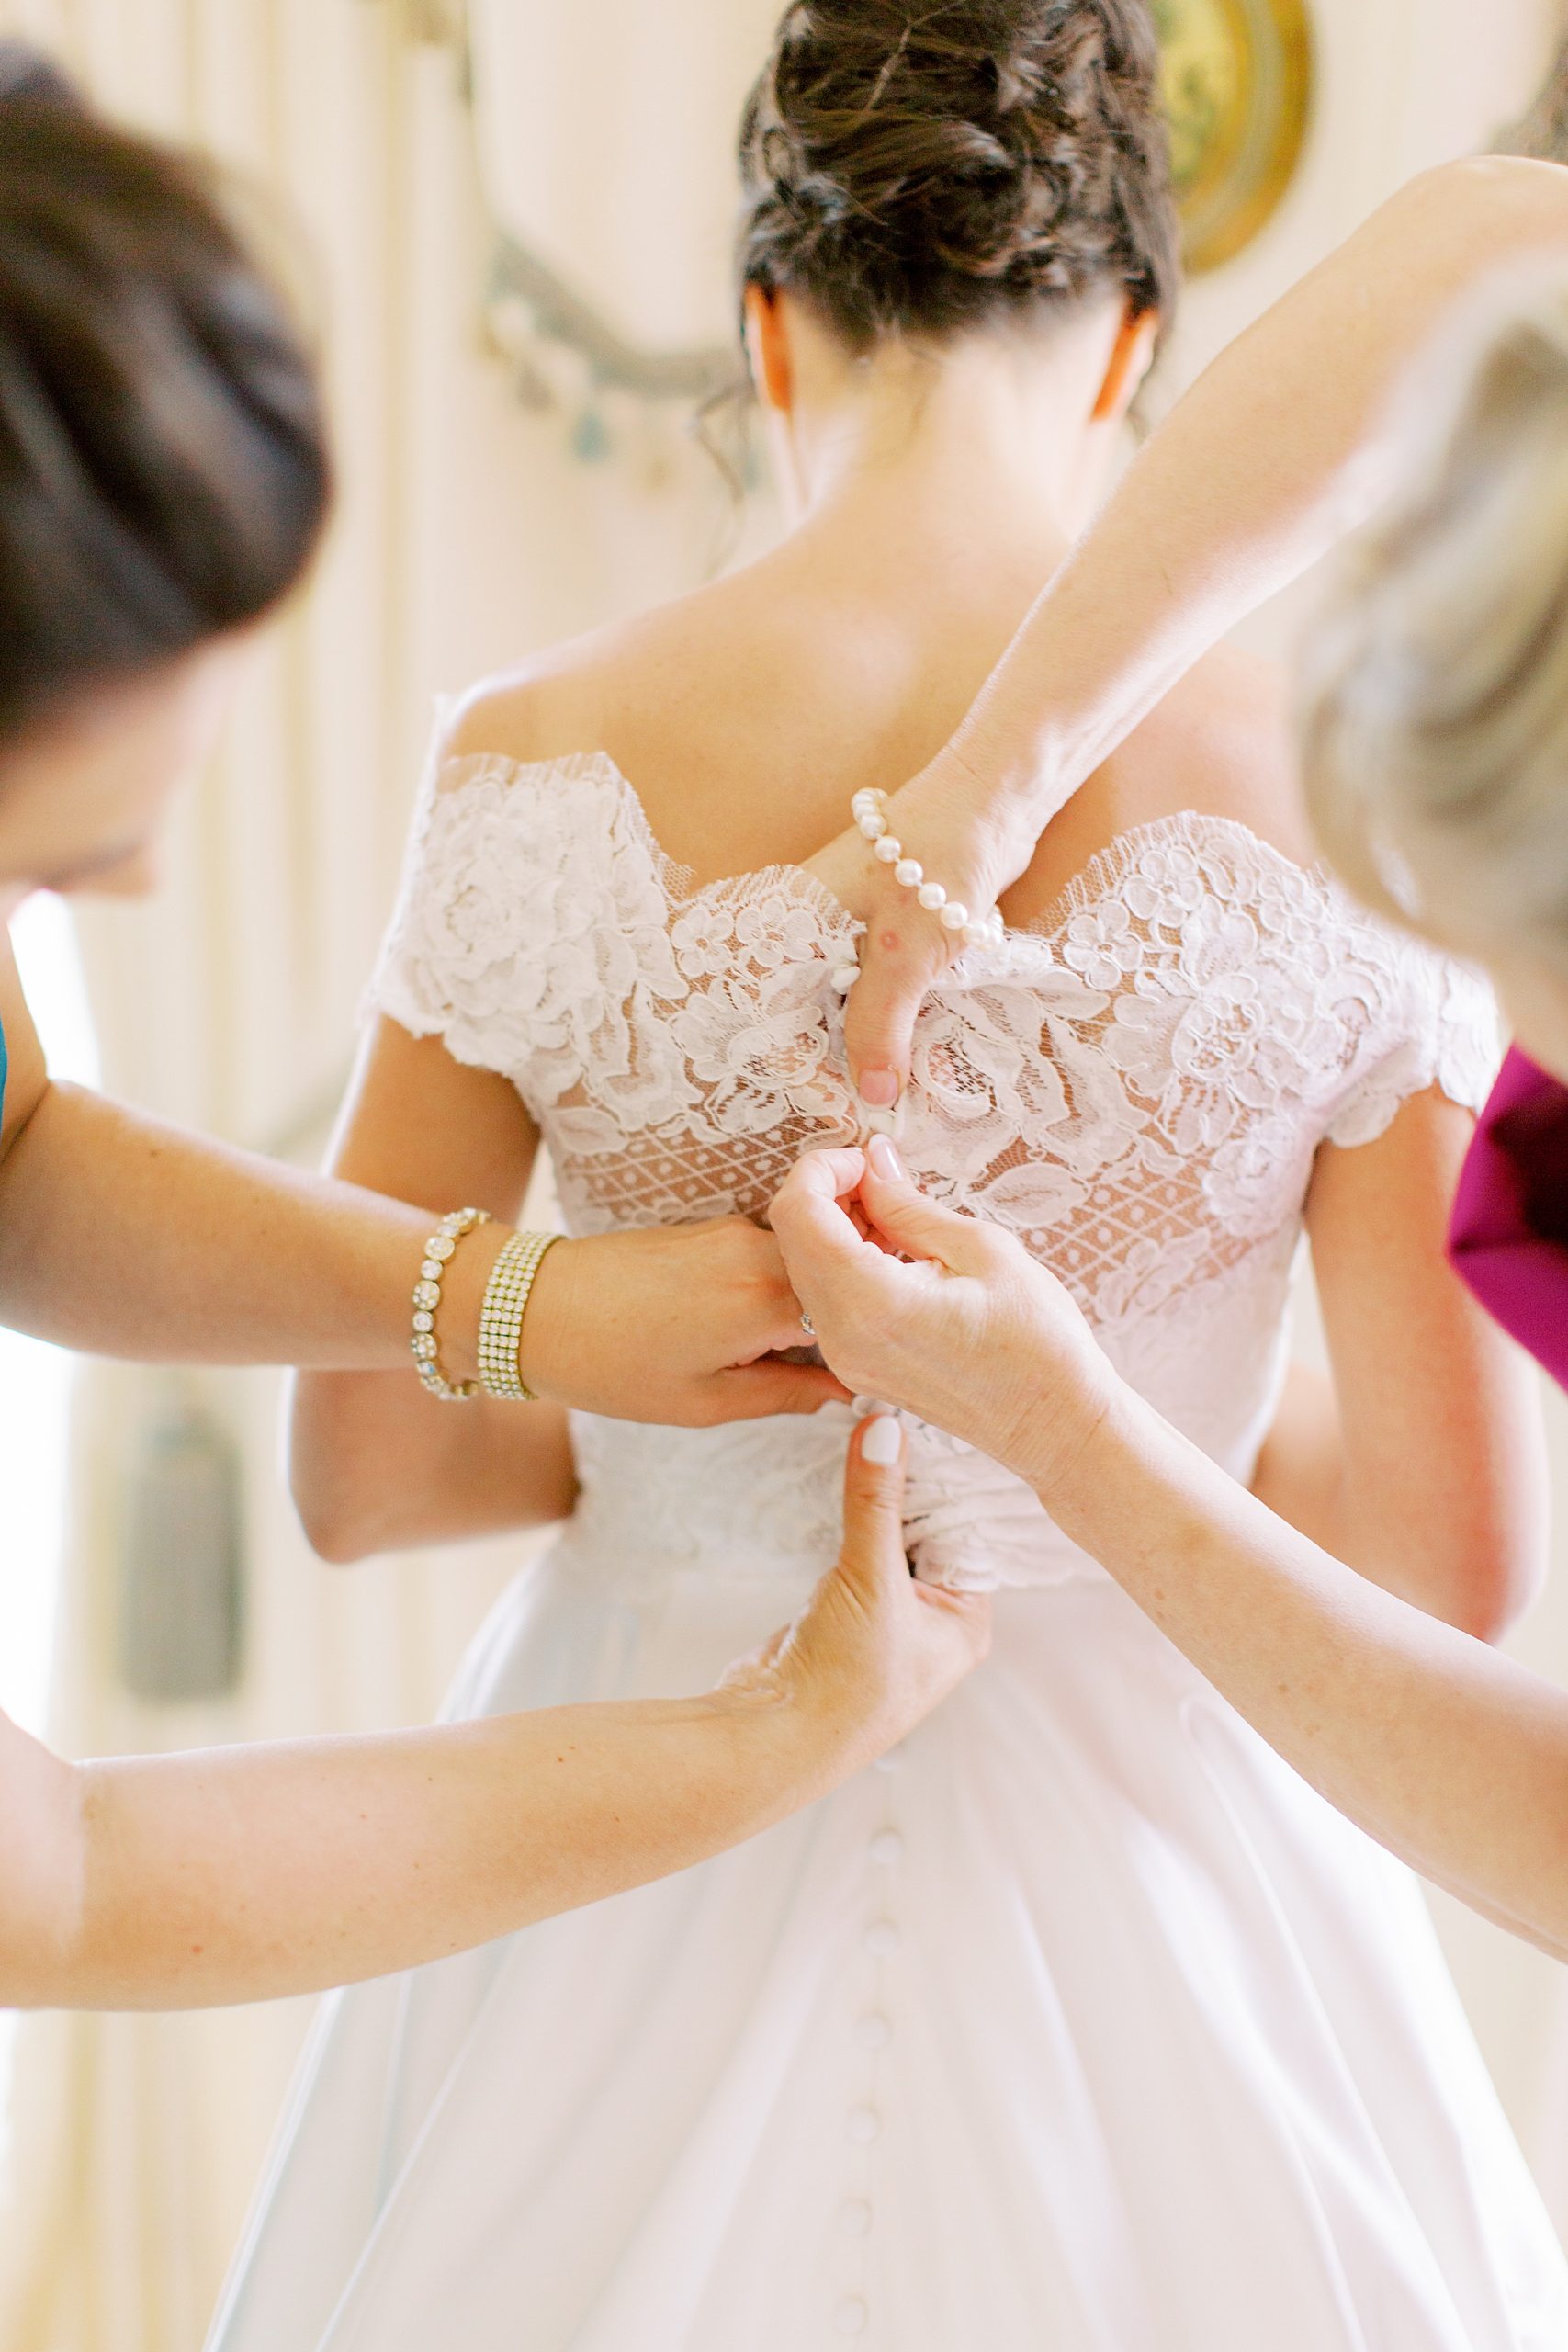 bridesmaid and mother help bride into wedding gown